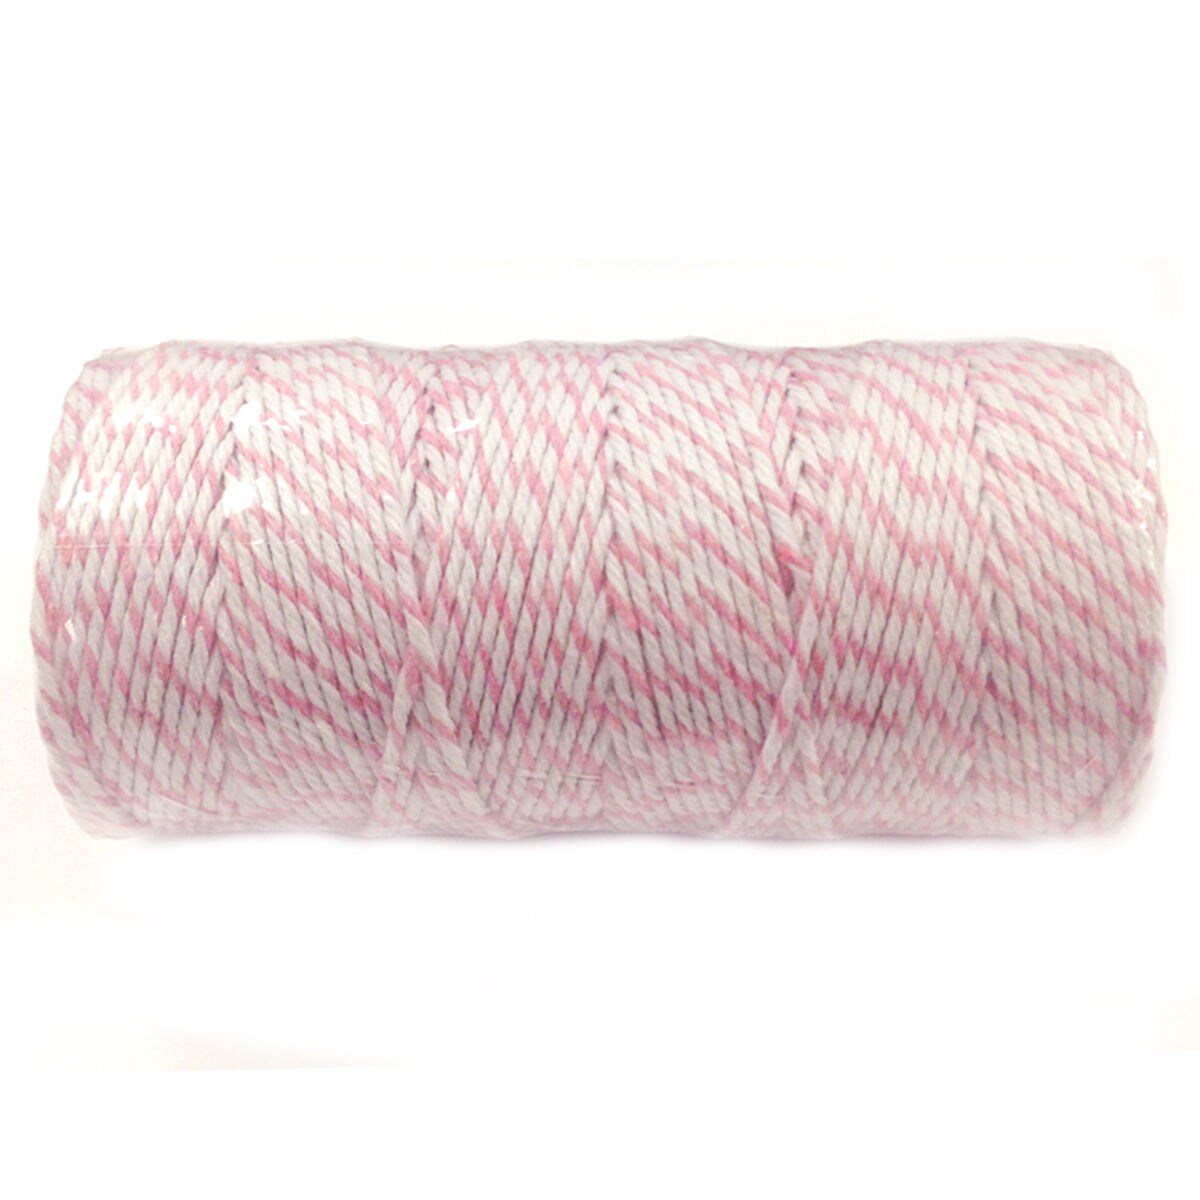 Wrapables Cotton Baker's Twine 12ply 100 Yard Pink